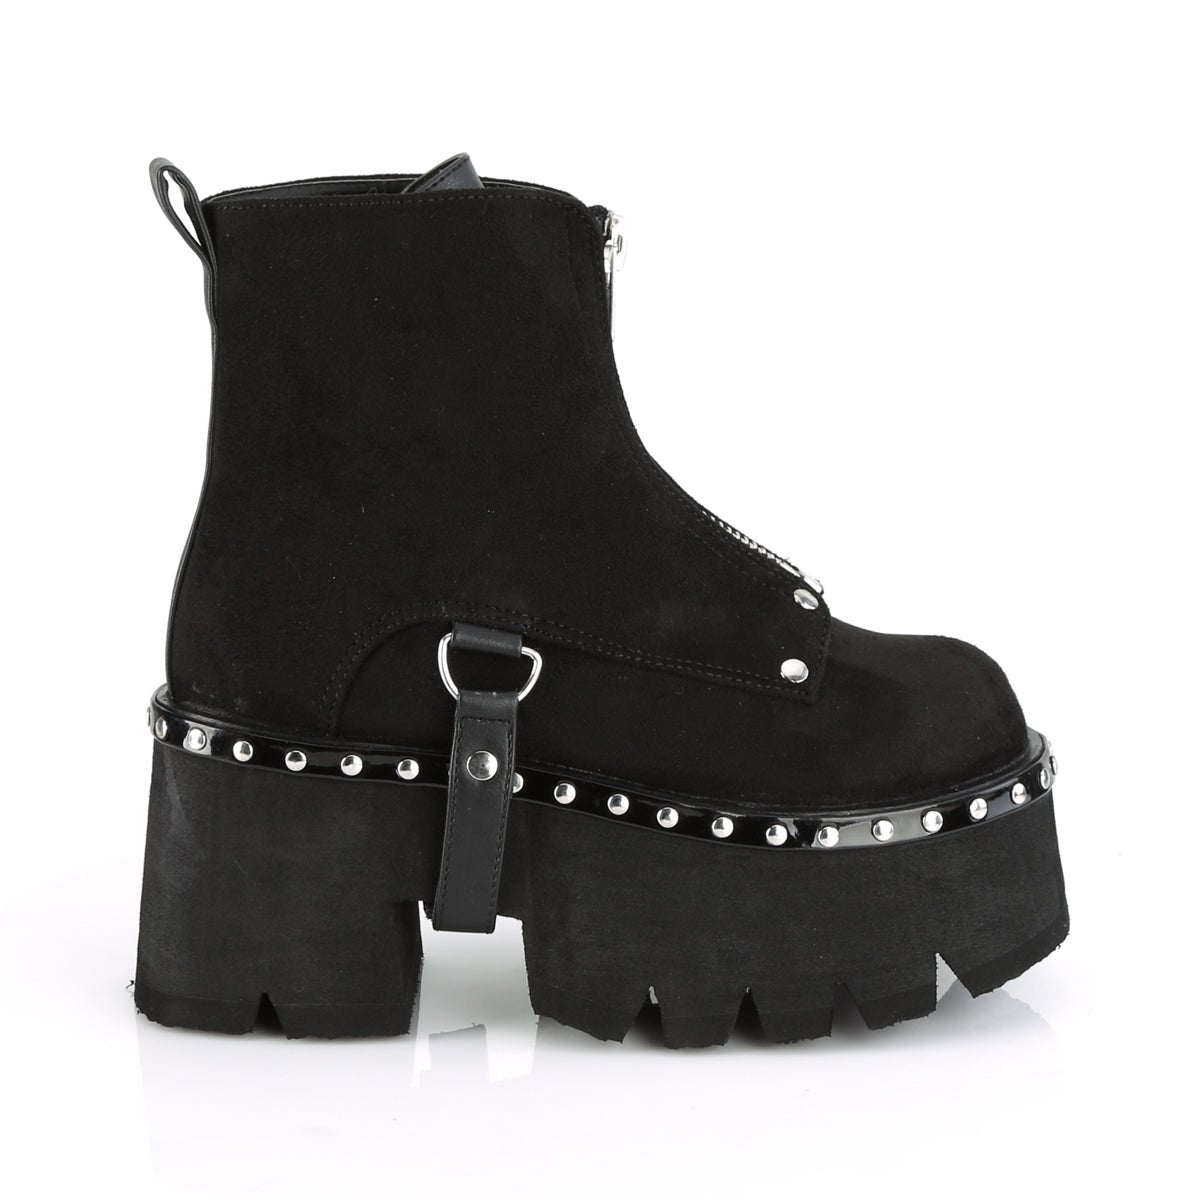 Too Fast | Demonia Ashes 100 | Black Vegan Suede & Vegan Leather Women's Ankle Boots